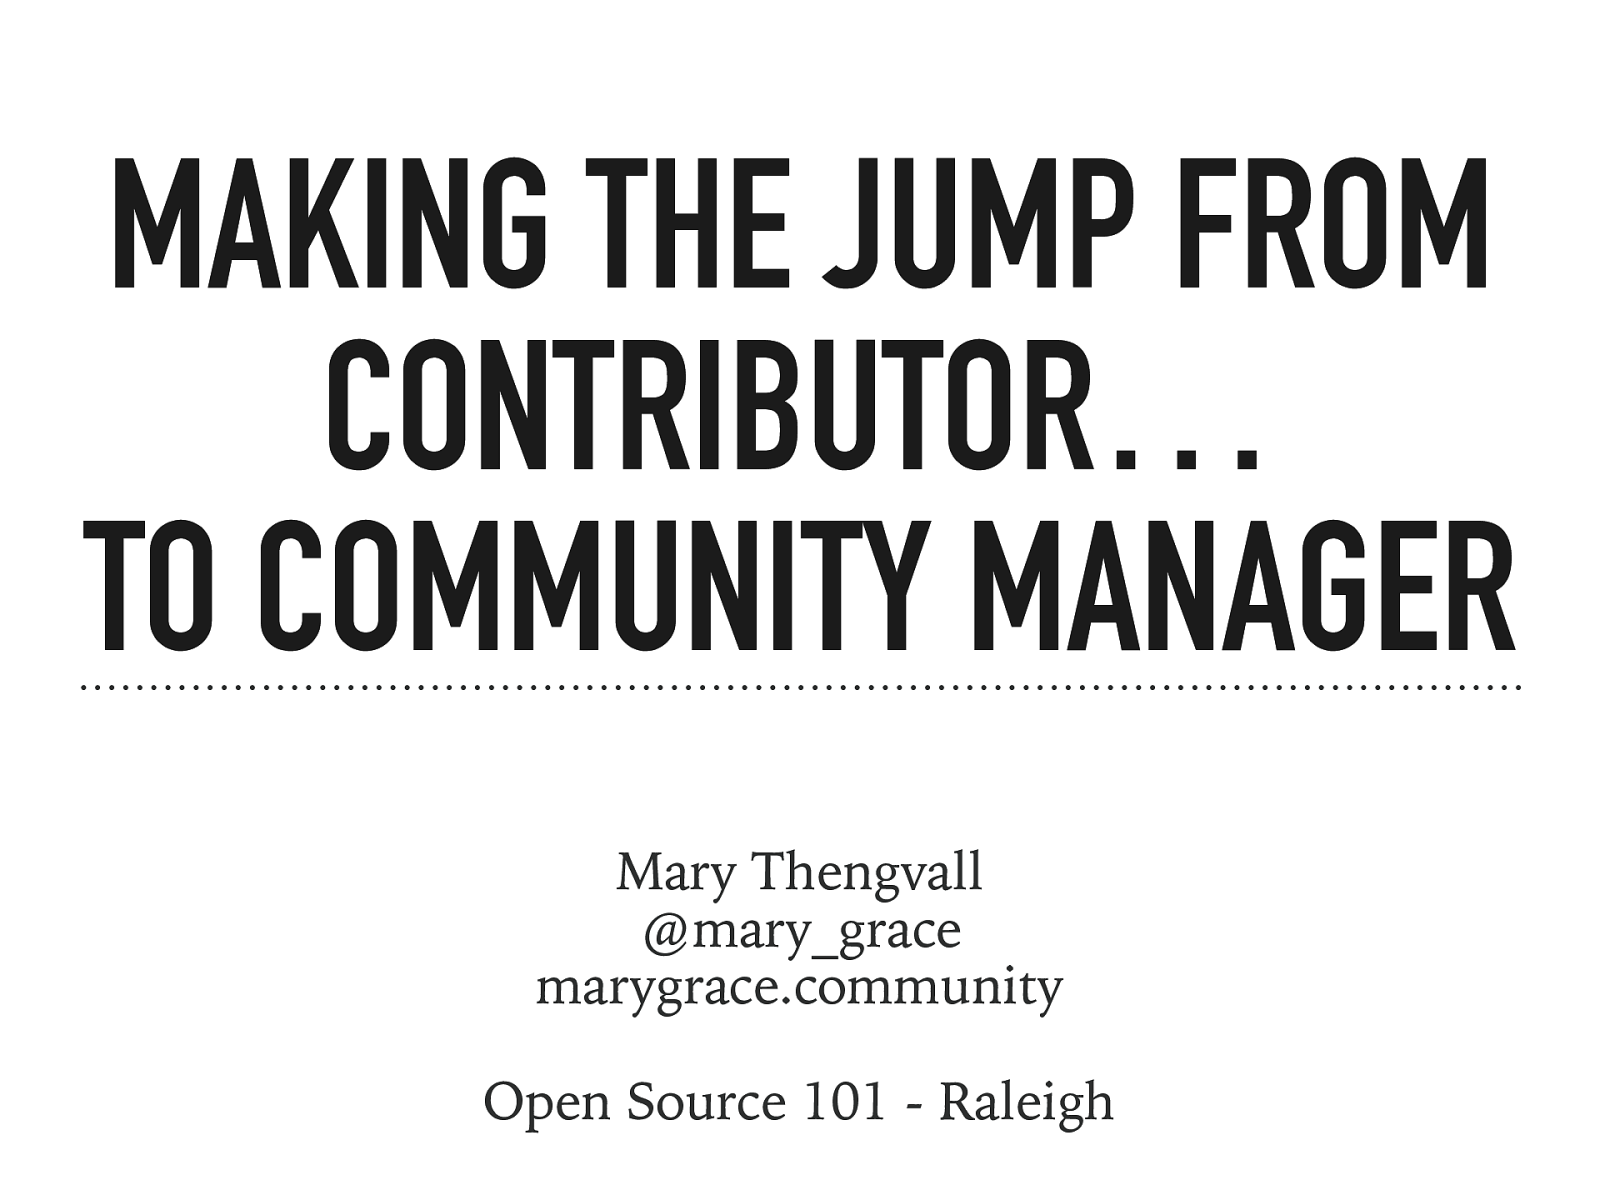 Making the Jump from Contributor to Community Manager